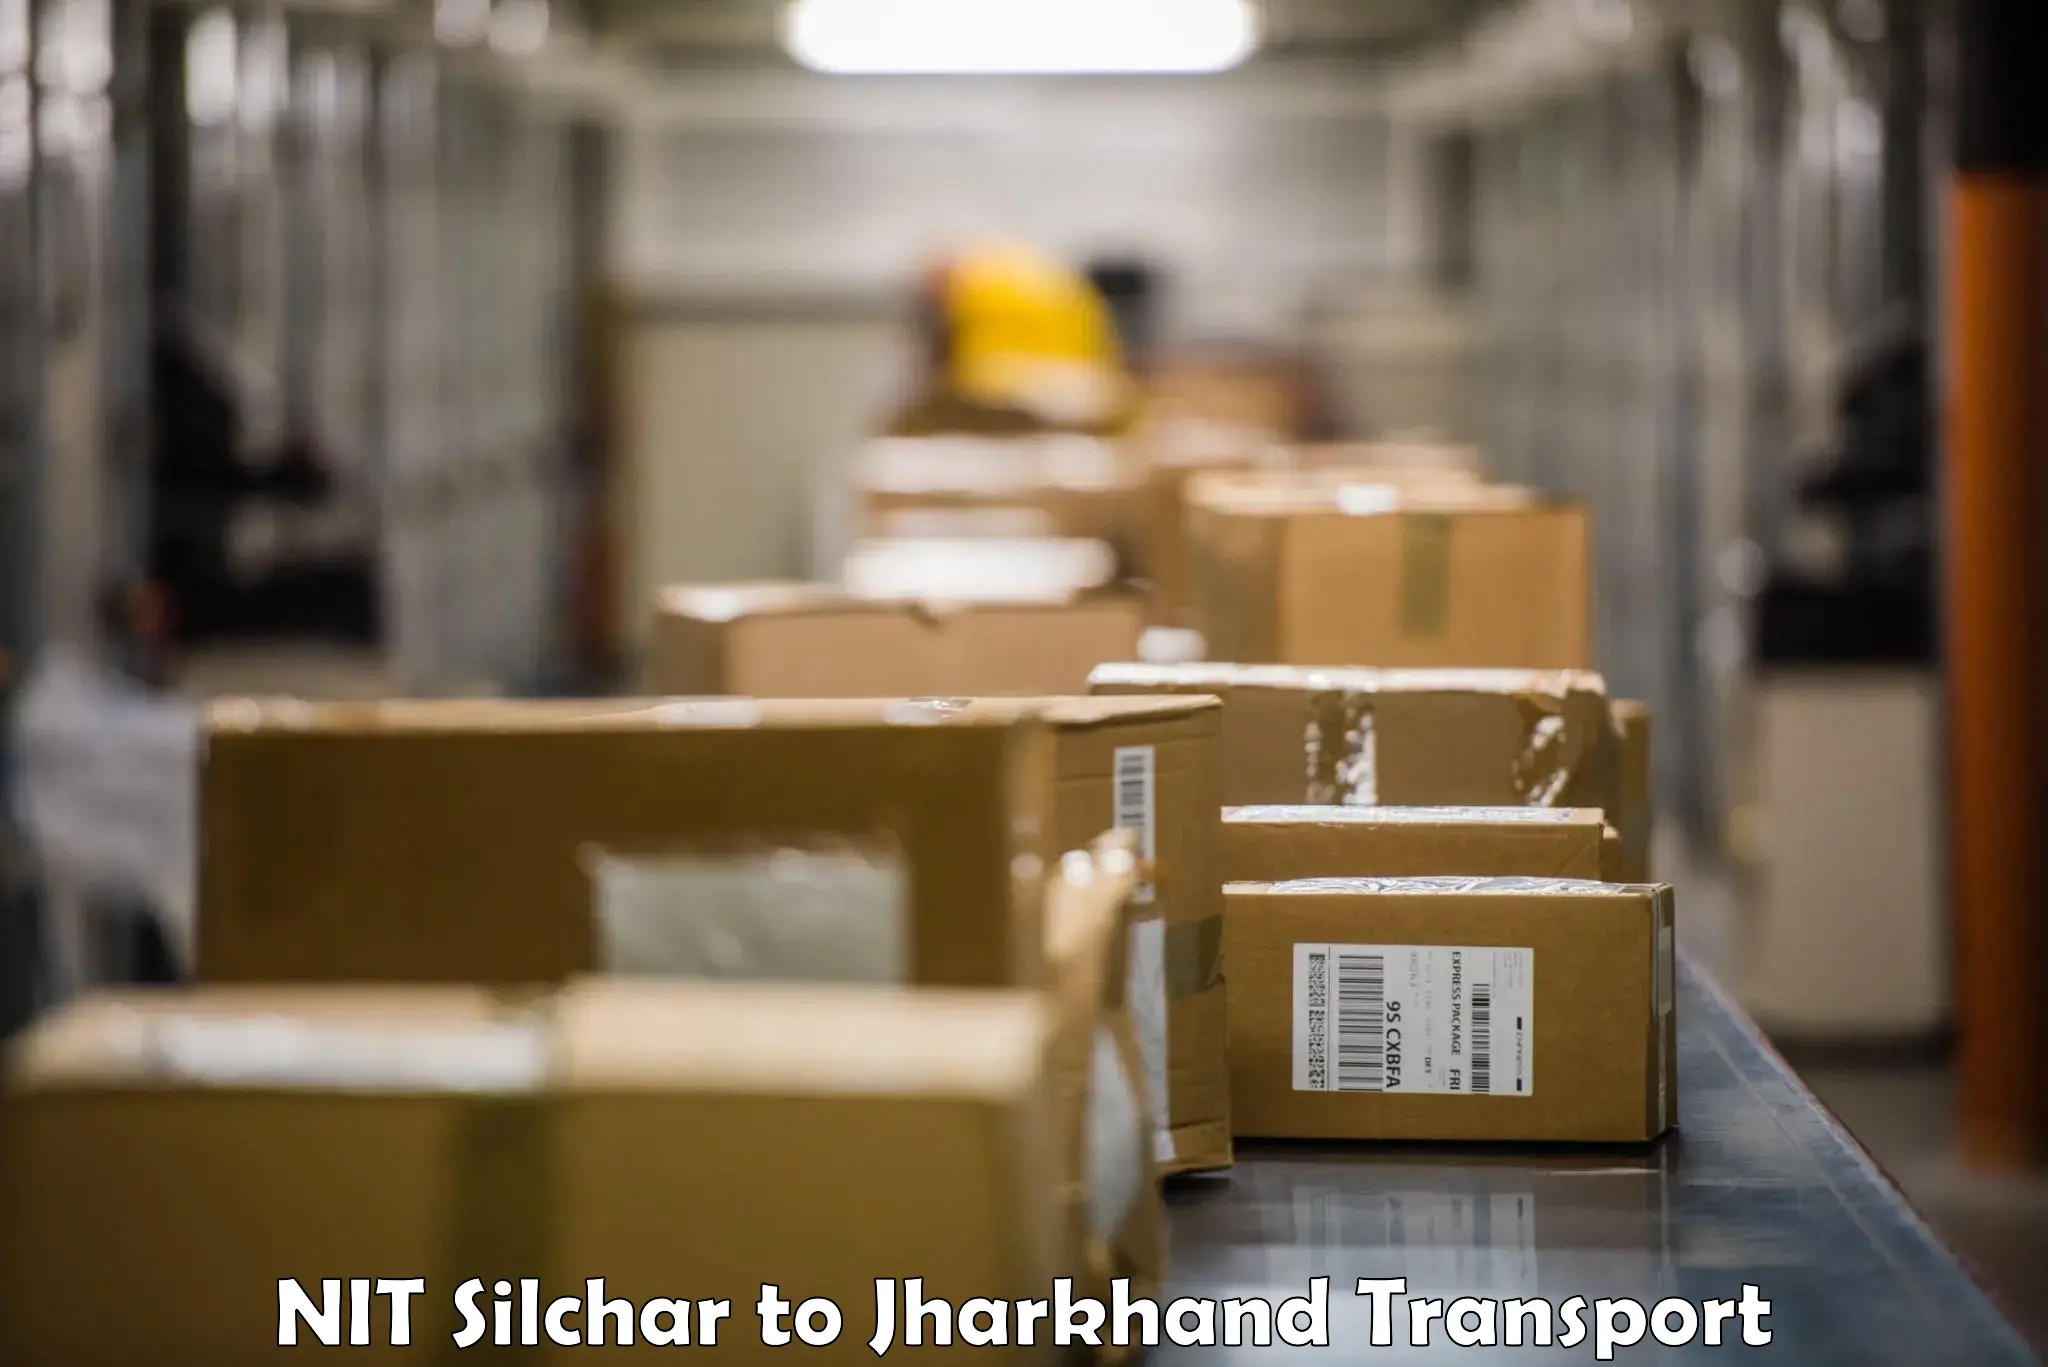 Vehicle transport services NIT Silchar to Jharkhand